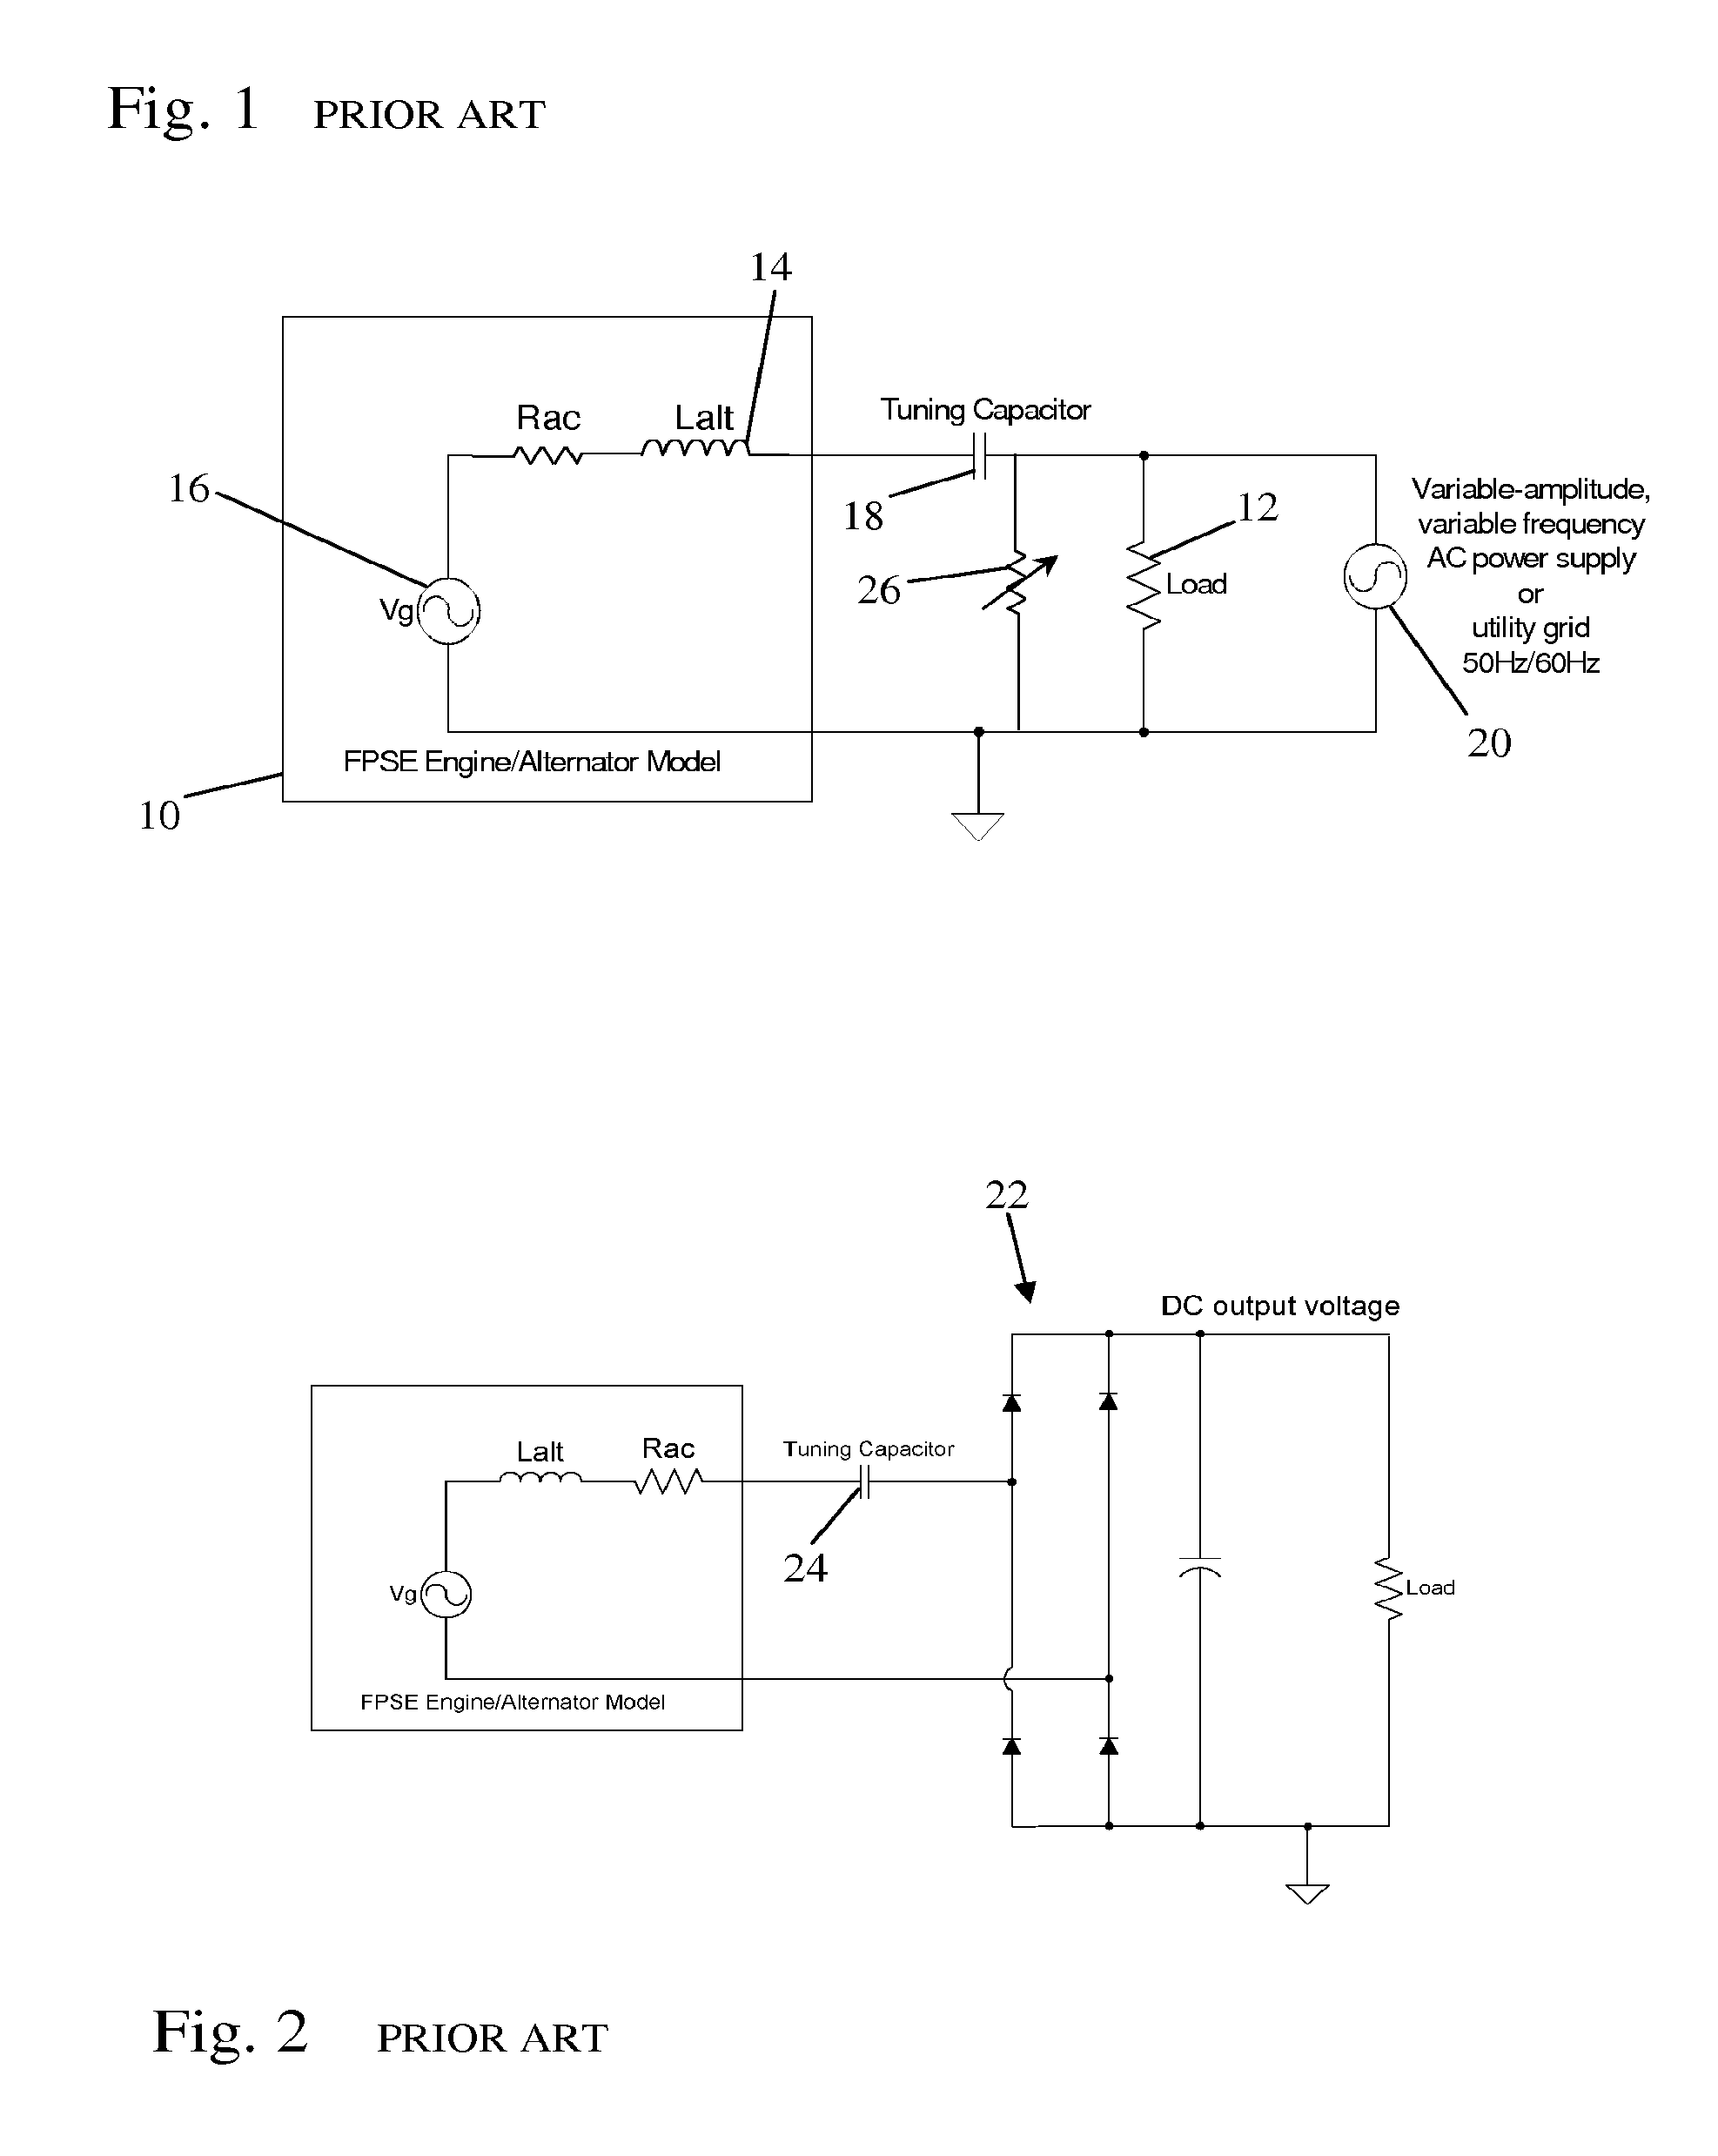 Controller computing a virtual tuning capacitor for controlling a free-piston stirling engine driving a linear alternator